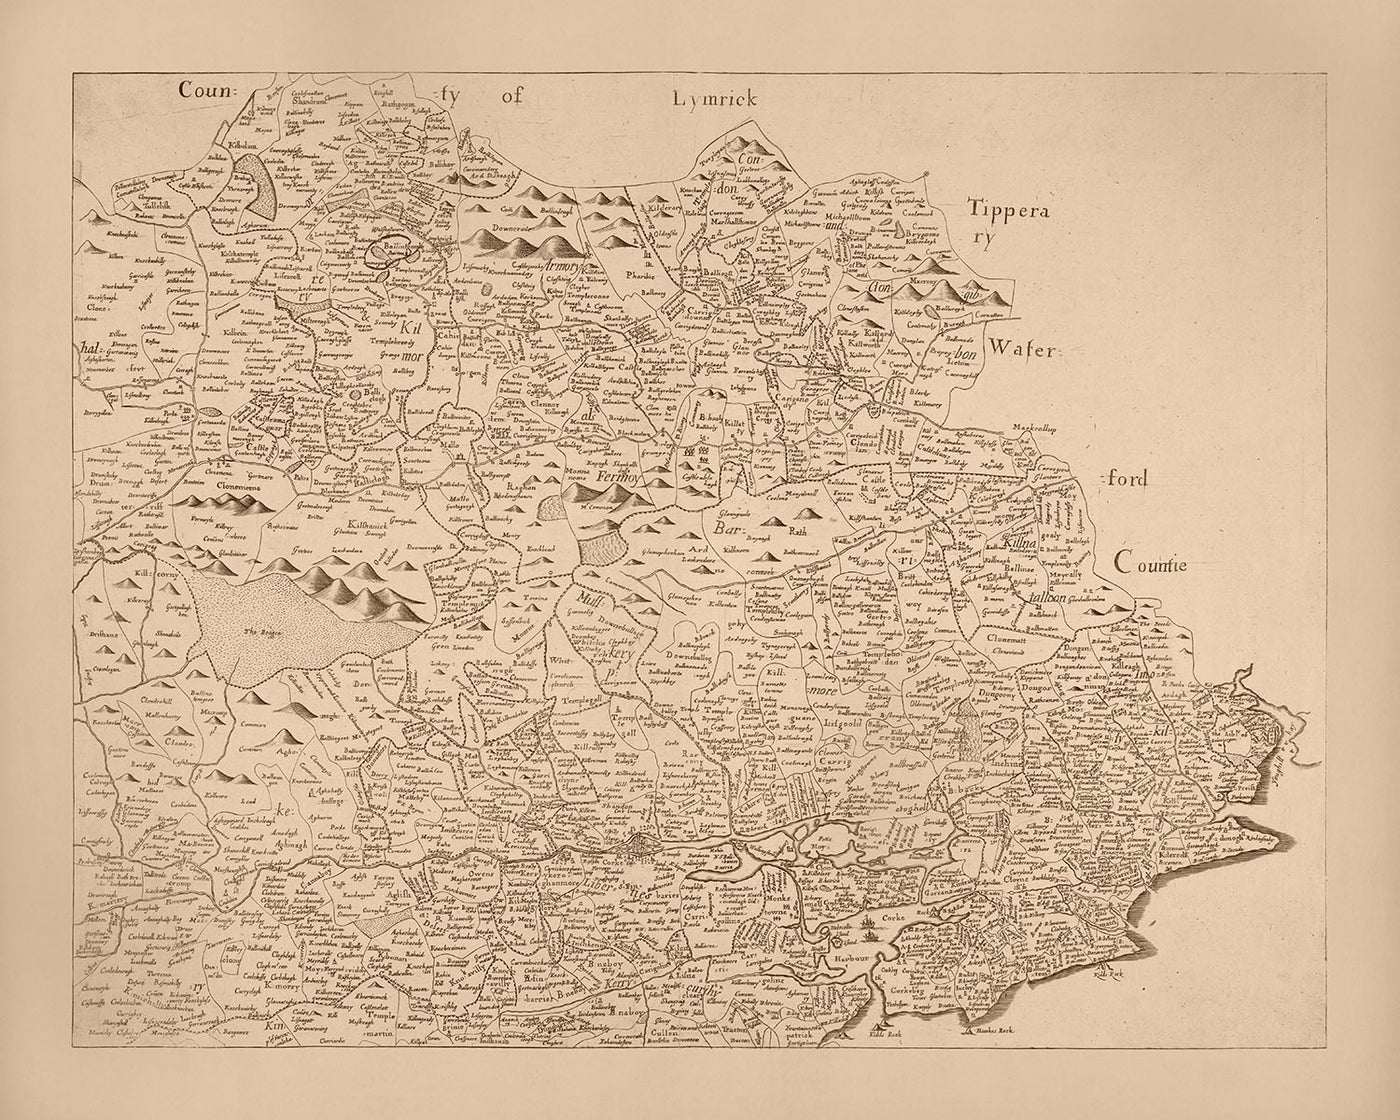 Old Map of County Cork by Petty, 1685: Kinsale, Bandon, Clonakilty, Bantry, Skibbereen